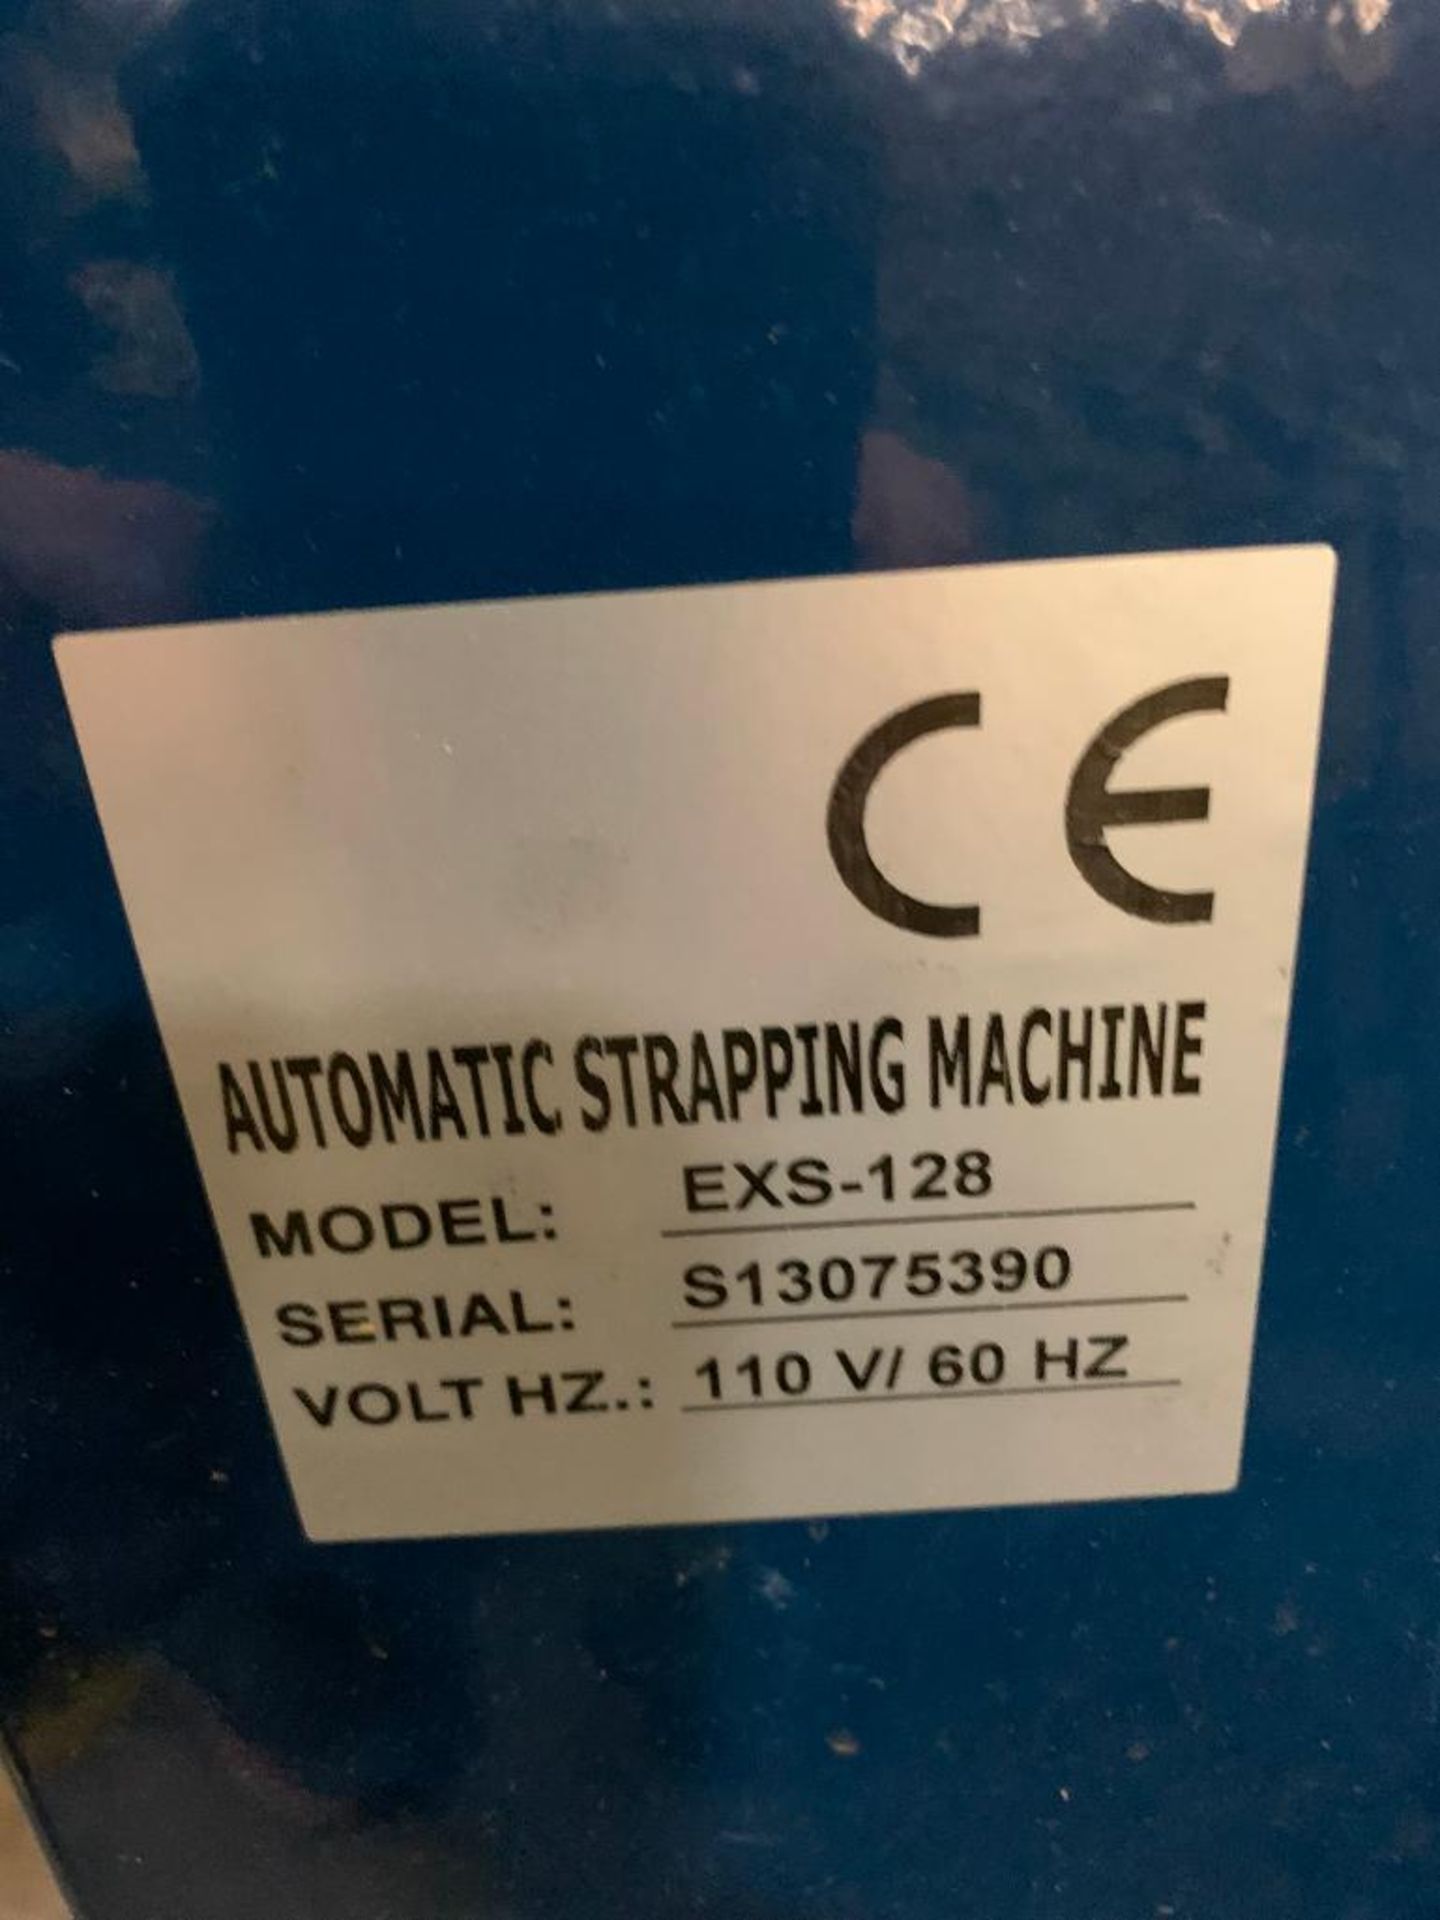 2014 Polychem Equipment Group Automatic Strapping Machine, Model EC3000, S/N 21439, 110 V, Single Ph - Image 2 of 2